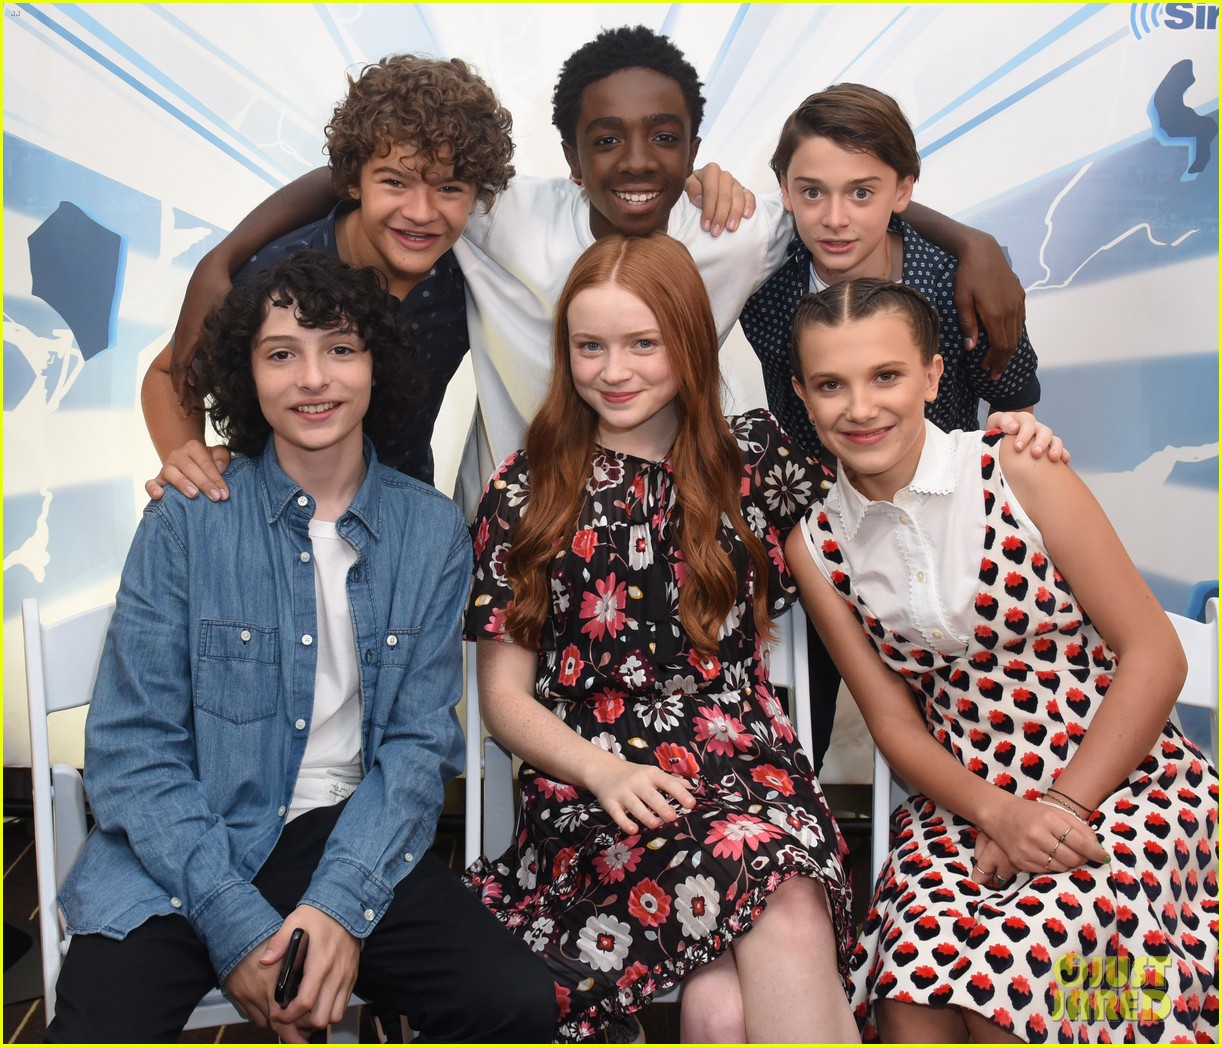 stranger things cast at comic con 2017 24